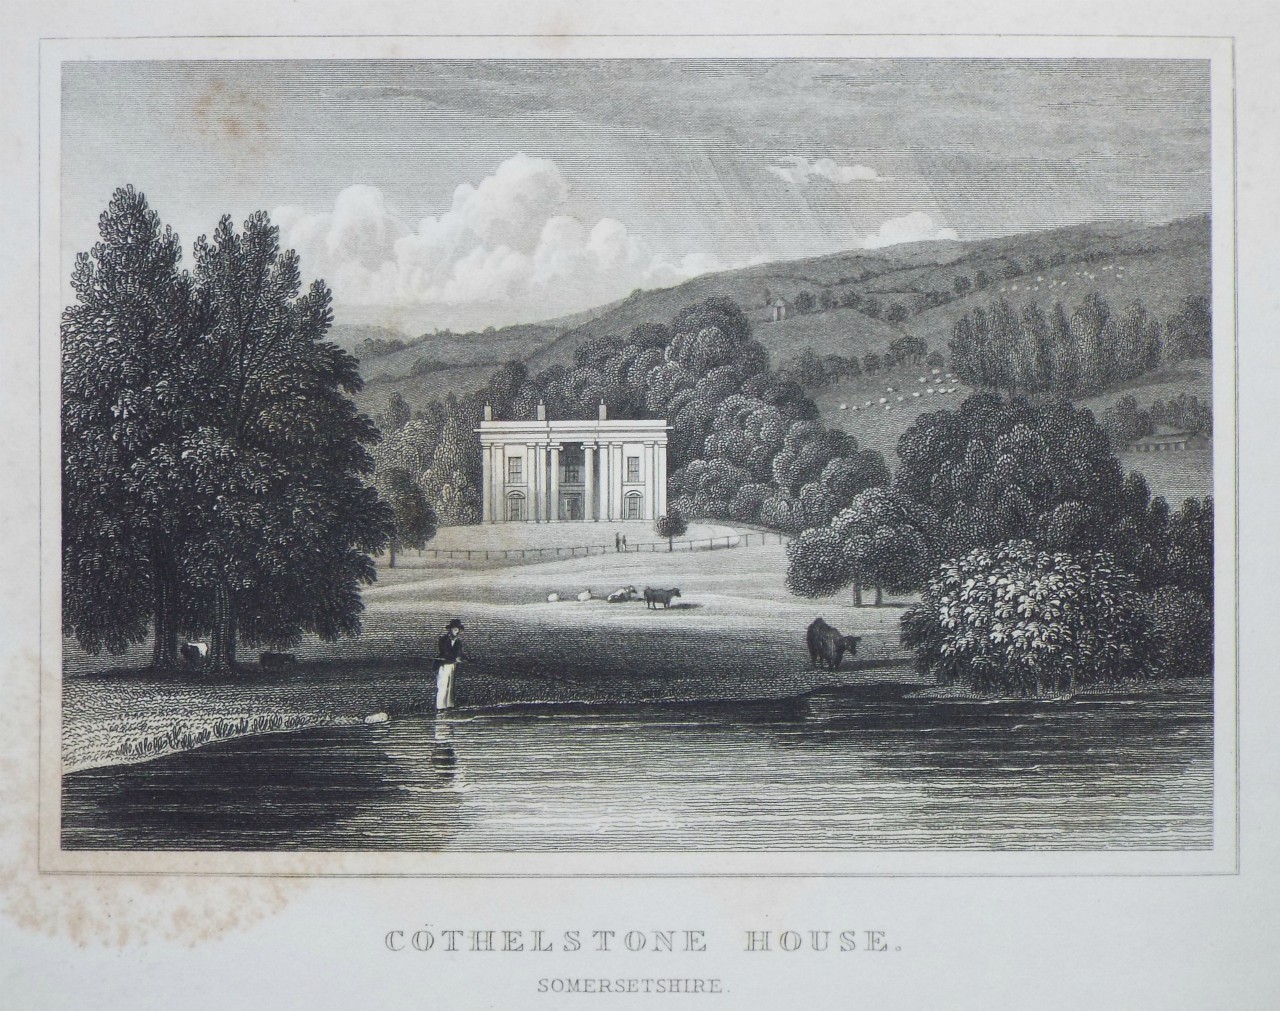 Print - Cothelstone House, Somersetshire. - 